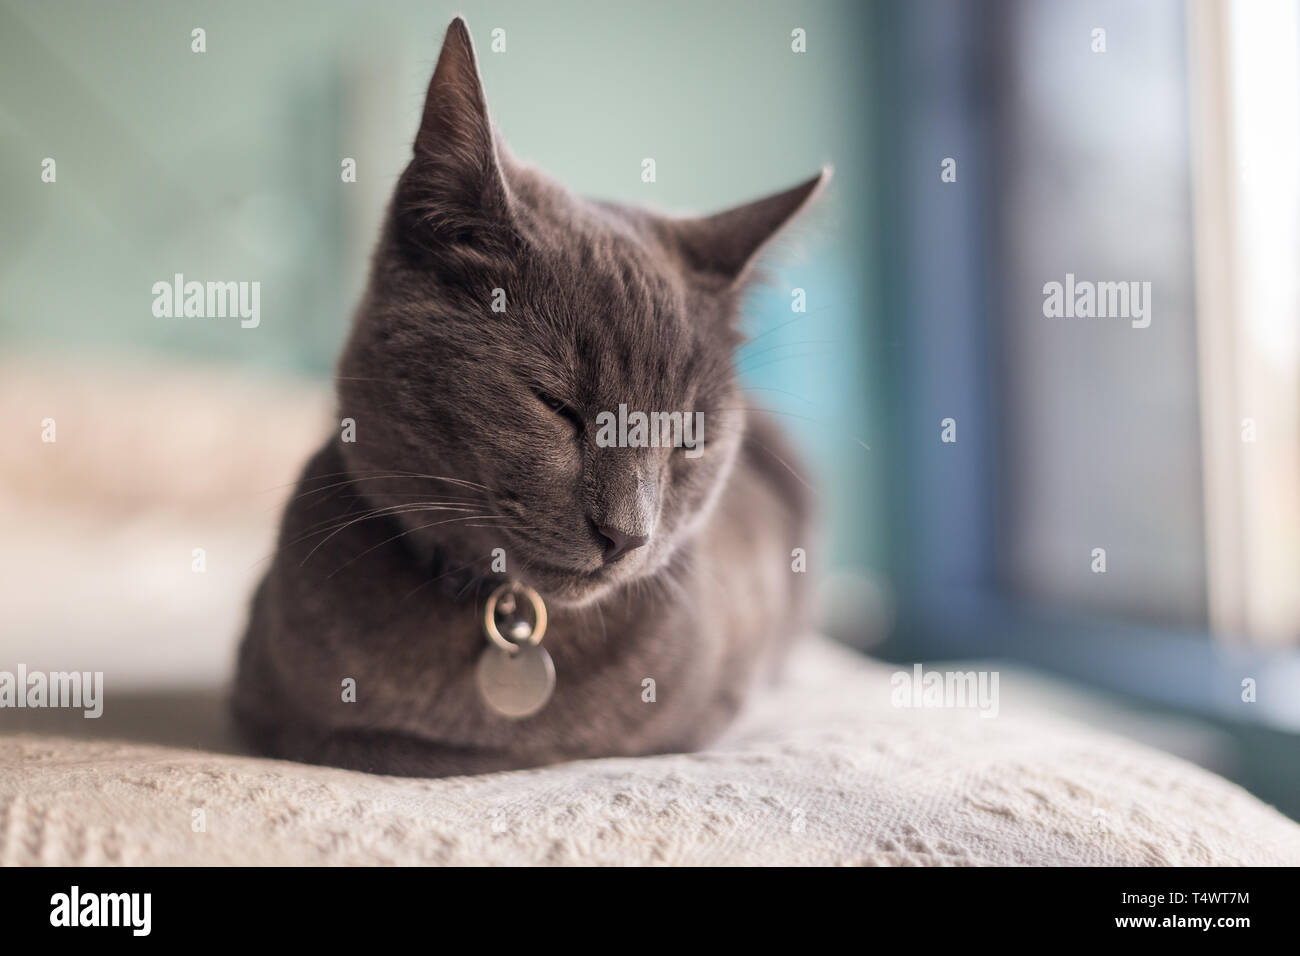 Tired grey kitten sleeping on bed with pastel coloured background and copy space Stock Photo